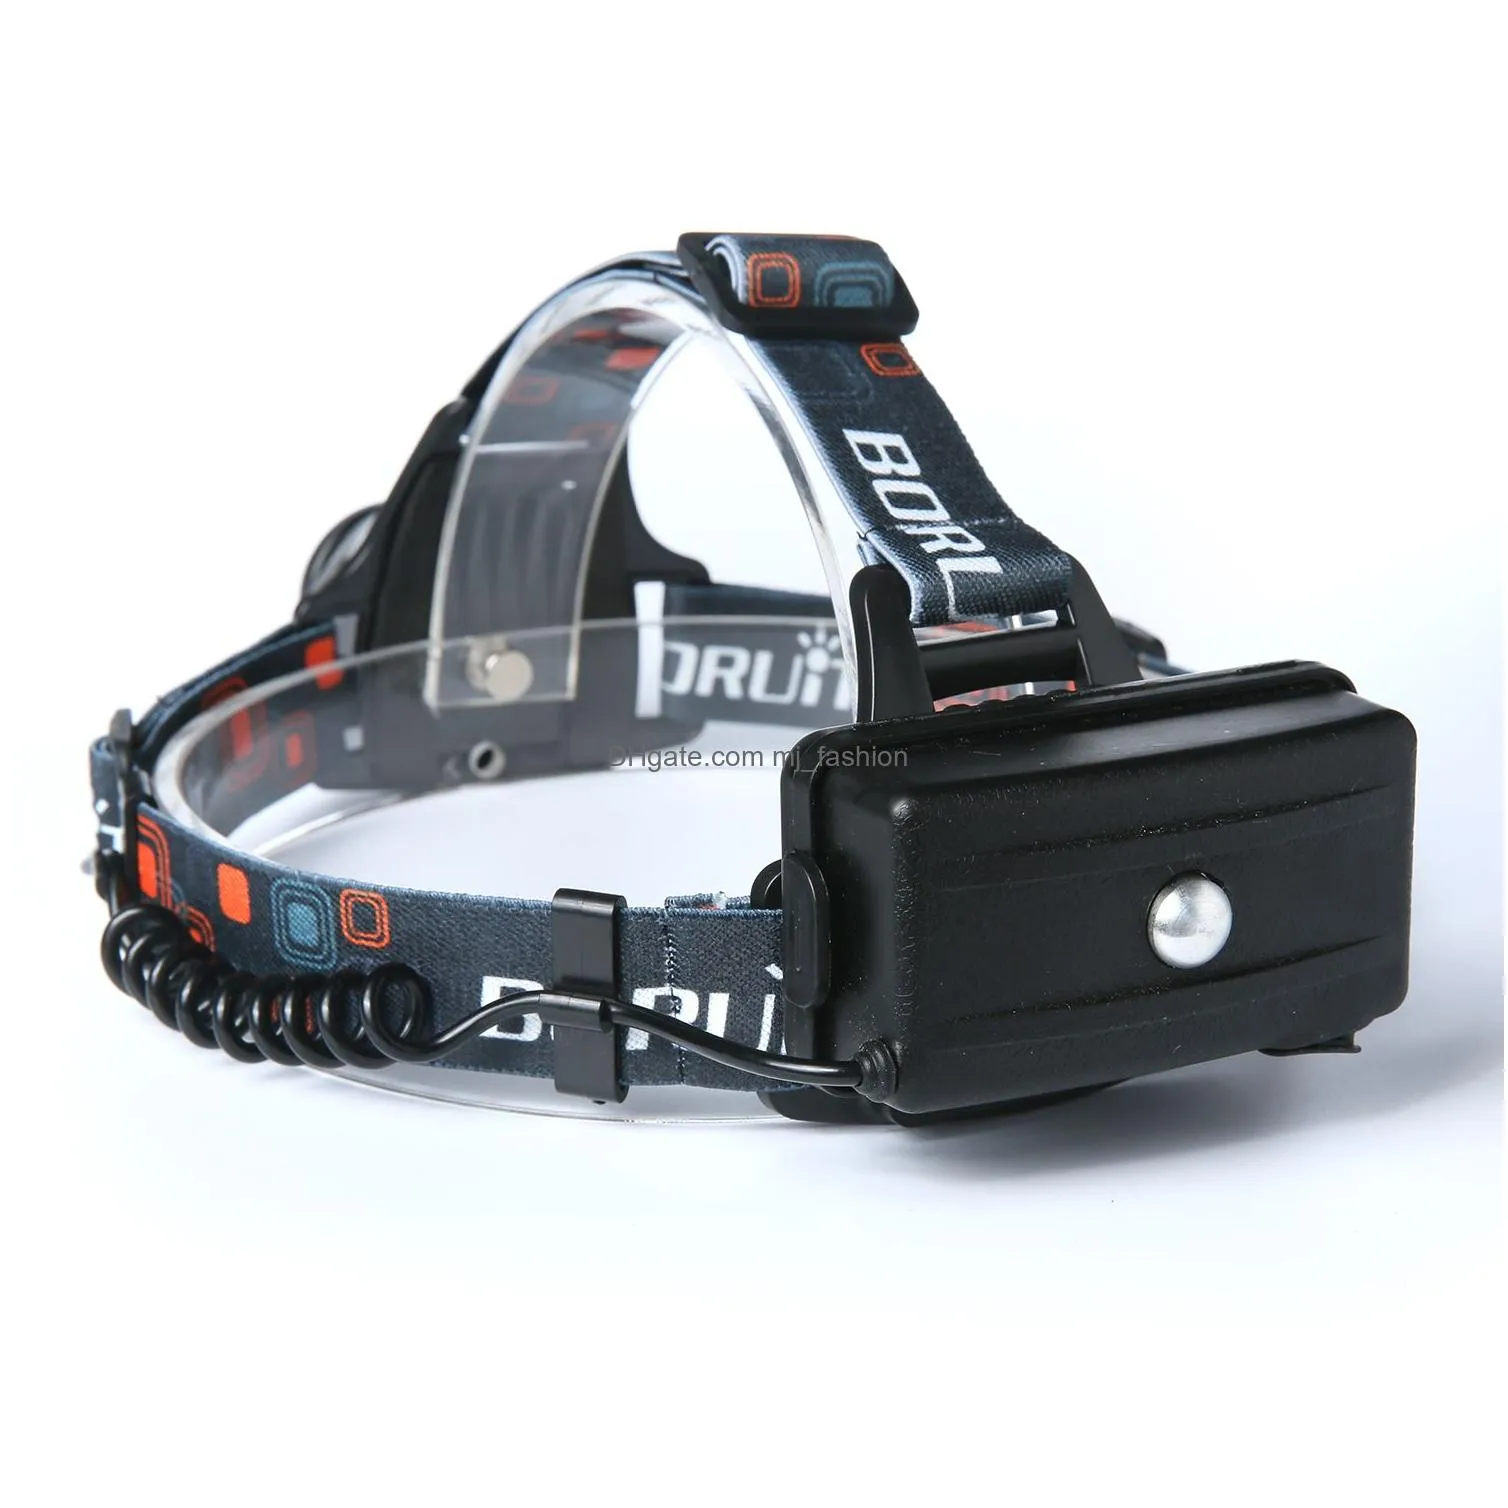 Headlamps Boruit 2200Lm 2 L2 Led Zoomable 3-Mode Headlamp Headlight Flashlight Light Head Fishing Lamp Zoom2210191 Drop Delivery Sport Dhqx3